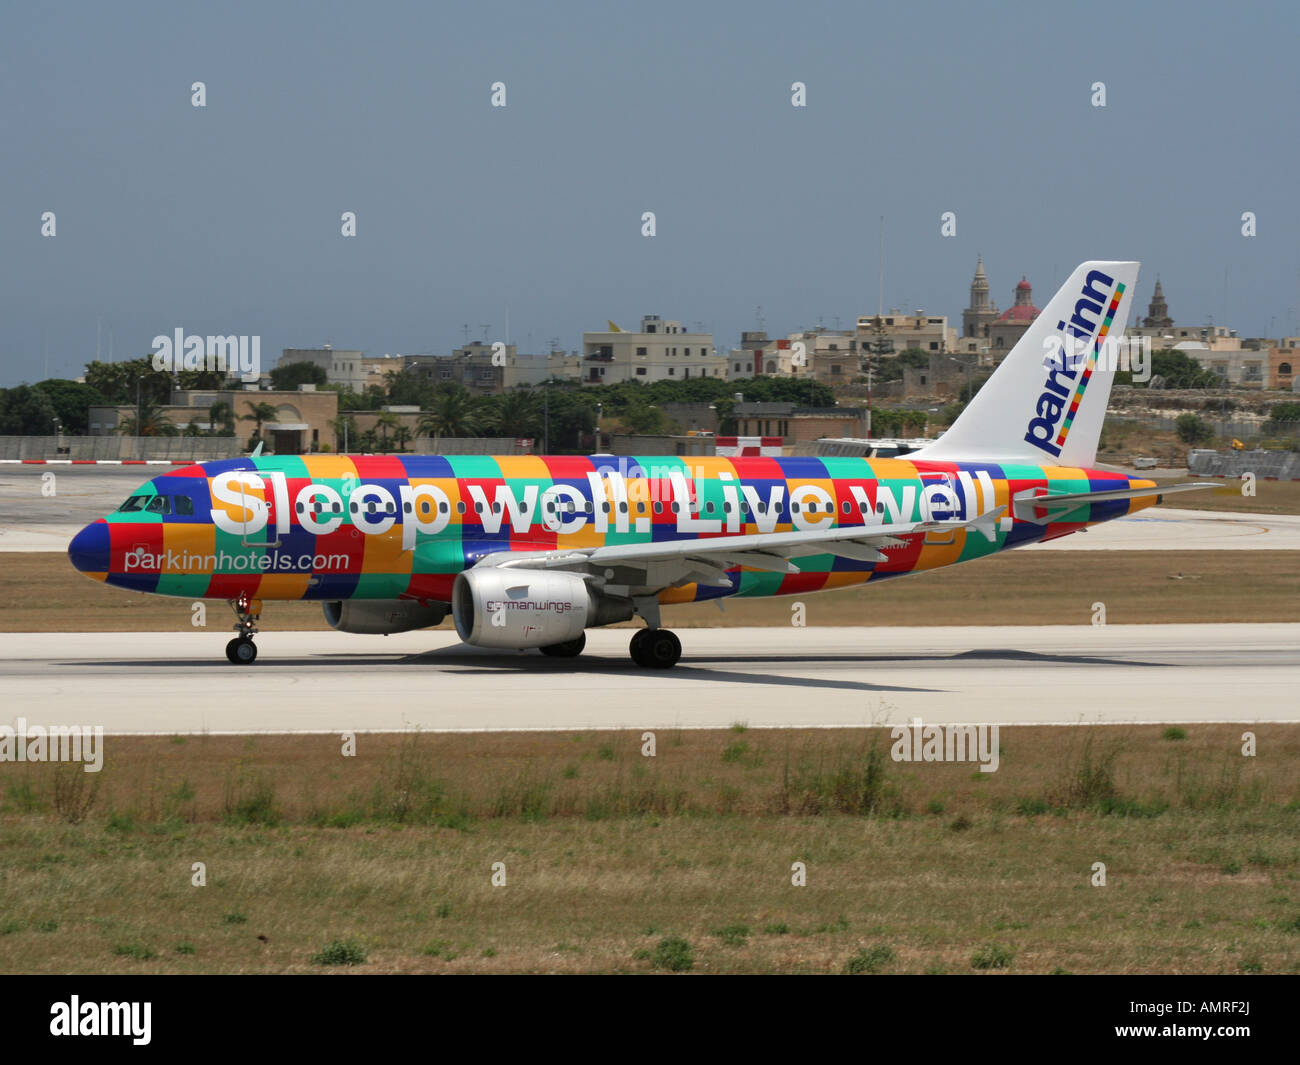 Germanwings Airbus A319 in a special Park Inn Hotel colour scheme departing from Malta International Airport Stock Photo